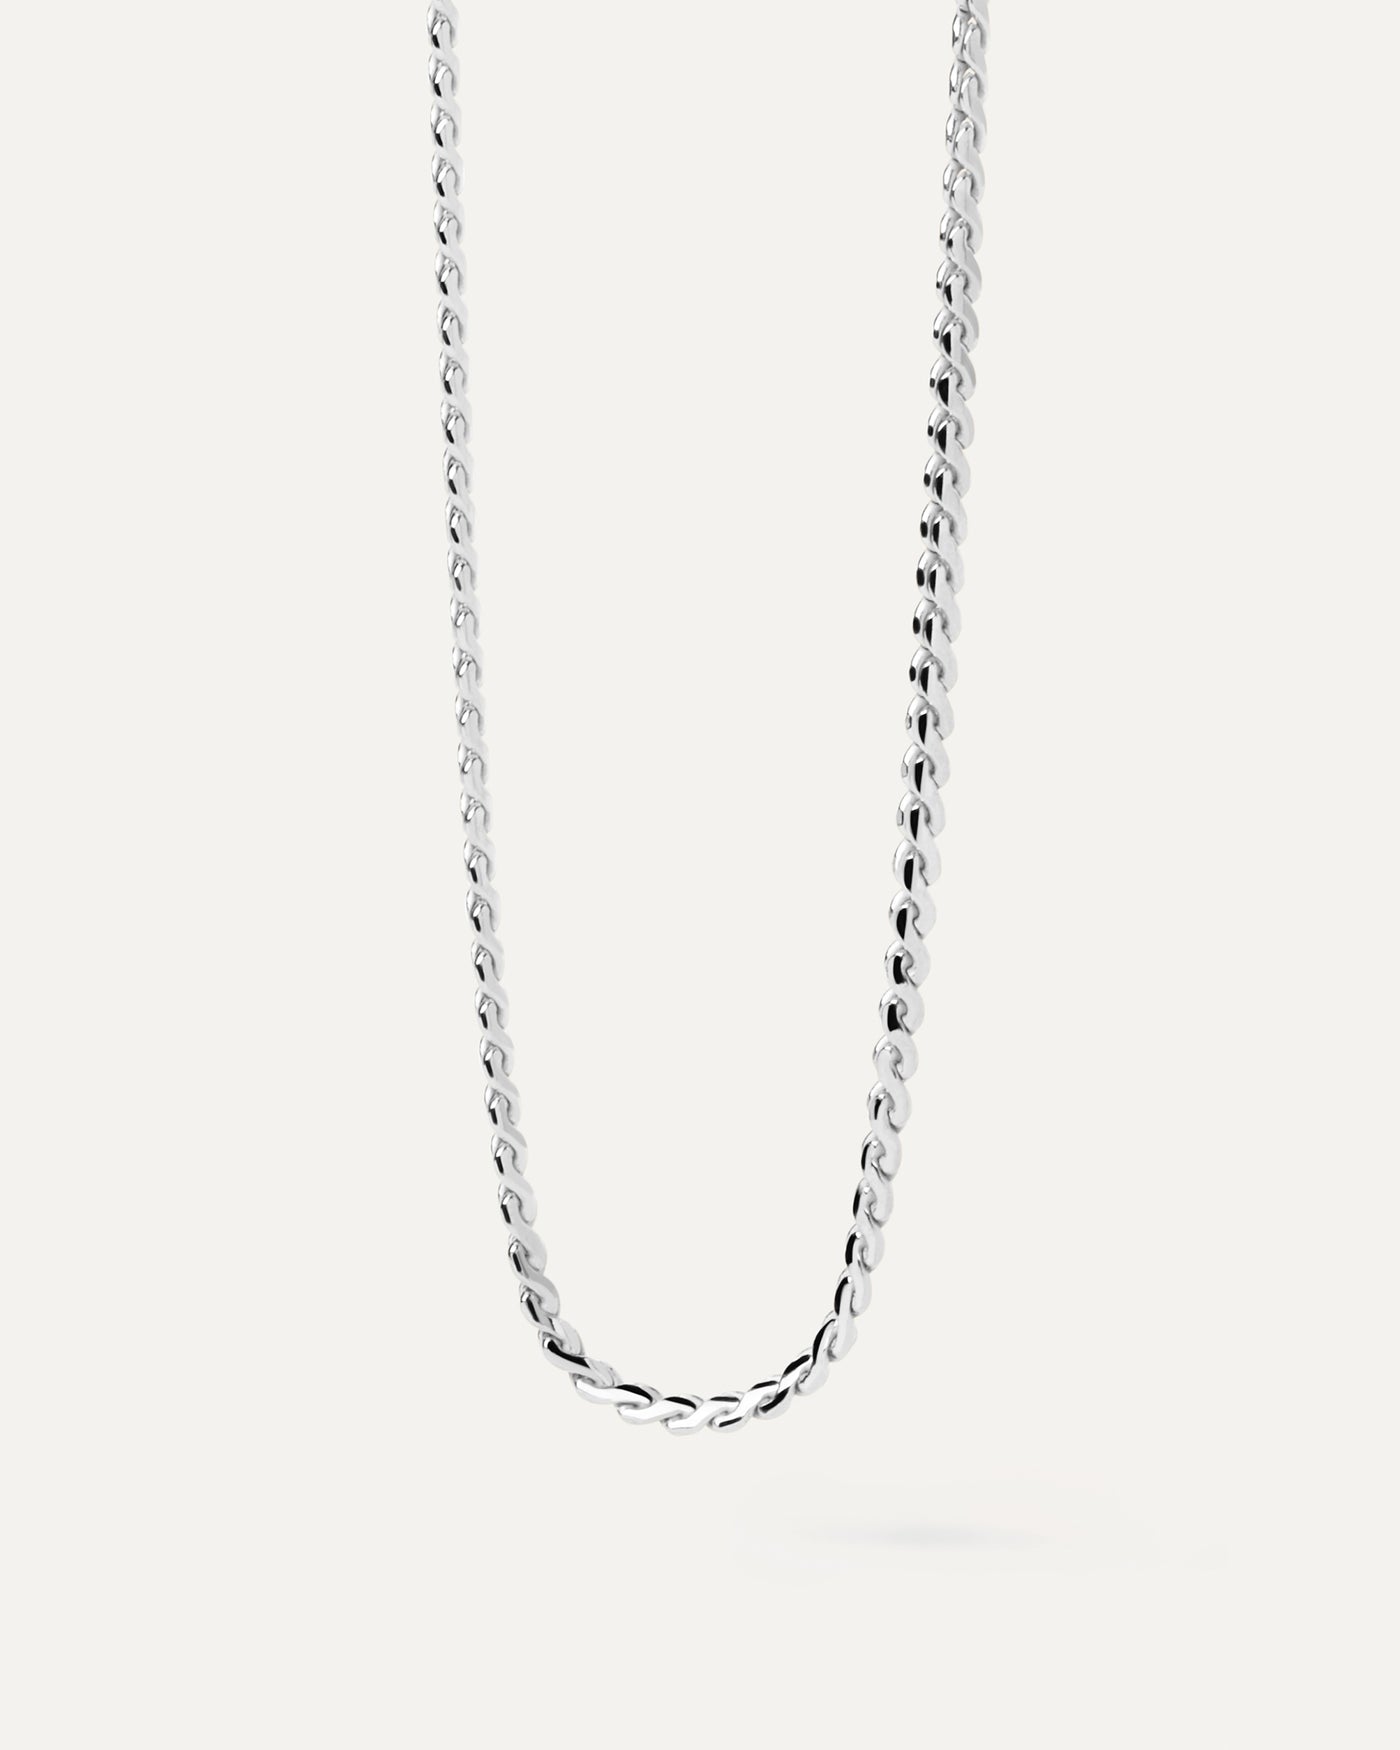 2023 Selection | Serpentine Silver Chain Necklace. Modern serpentine silver chain necklace with braided links. Get the latest arrival from PDPAOLA. Place your order safely and get this Best Seller. Free Shipping.